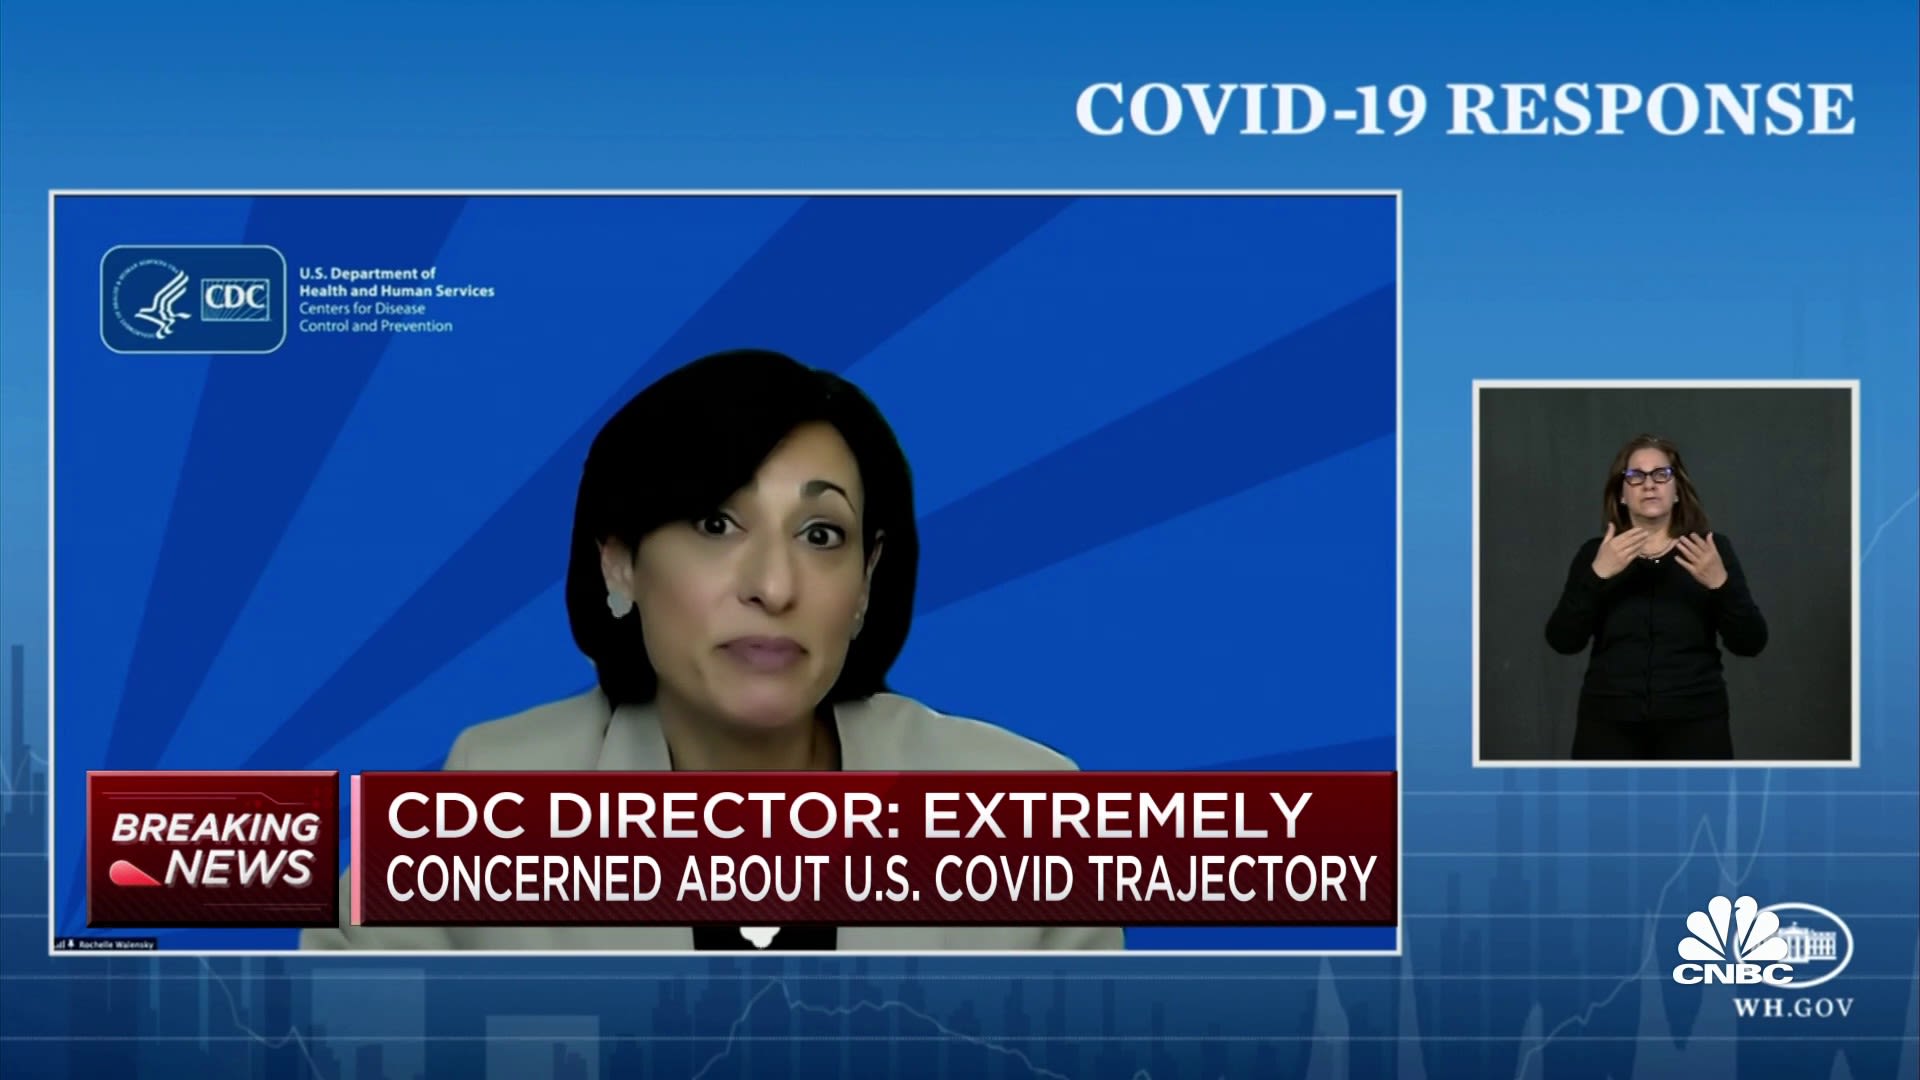 106860911-CDC-director-Extremely-concerned-about-the-US-Covid-trajectory-jpg